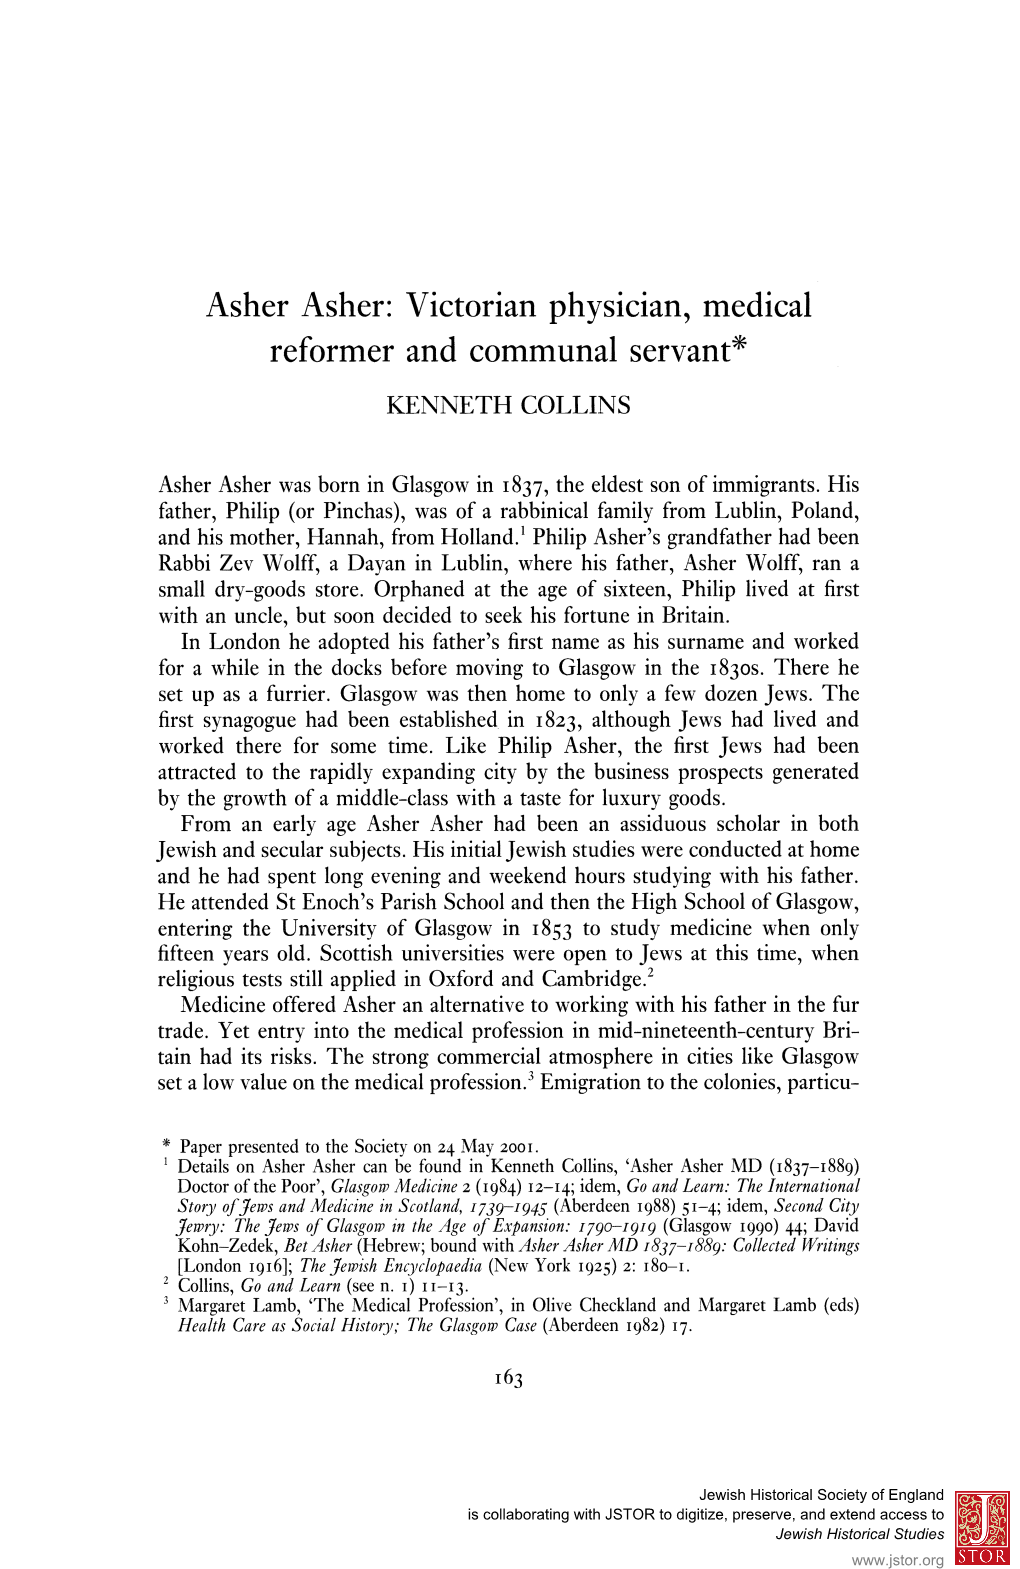 Asher Asher: Victorian Physician, Medical Reformer and Communal Servant* KENNETH COLLINS